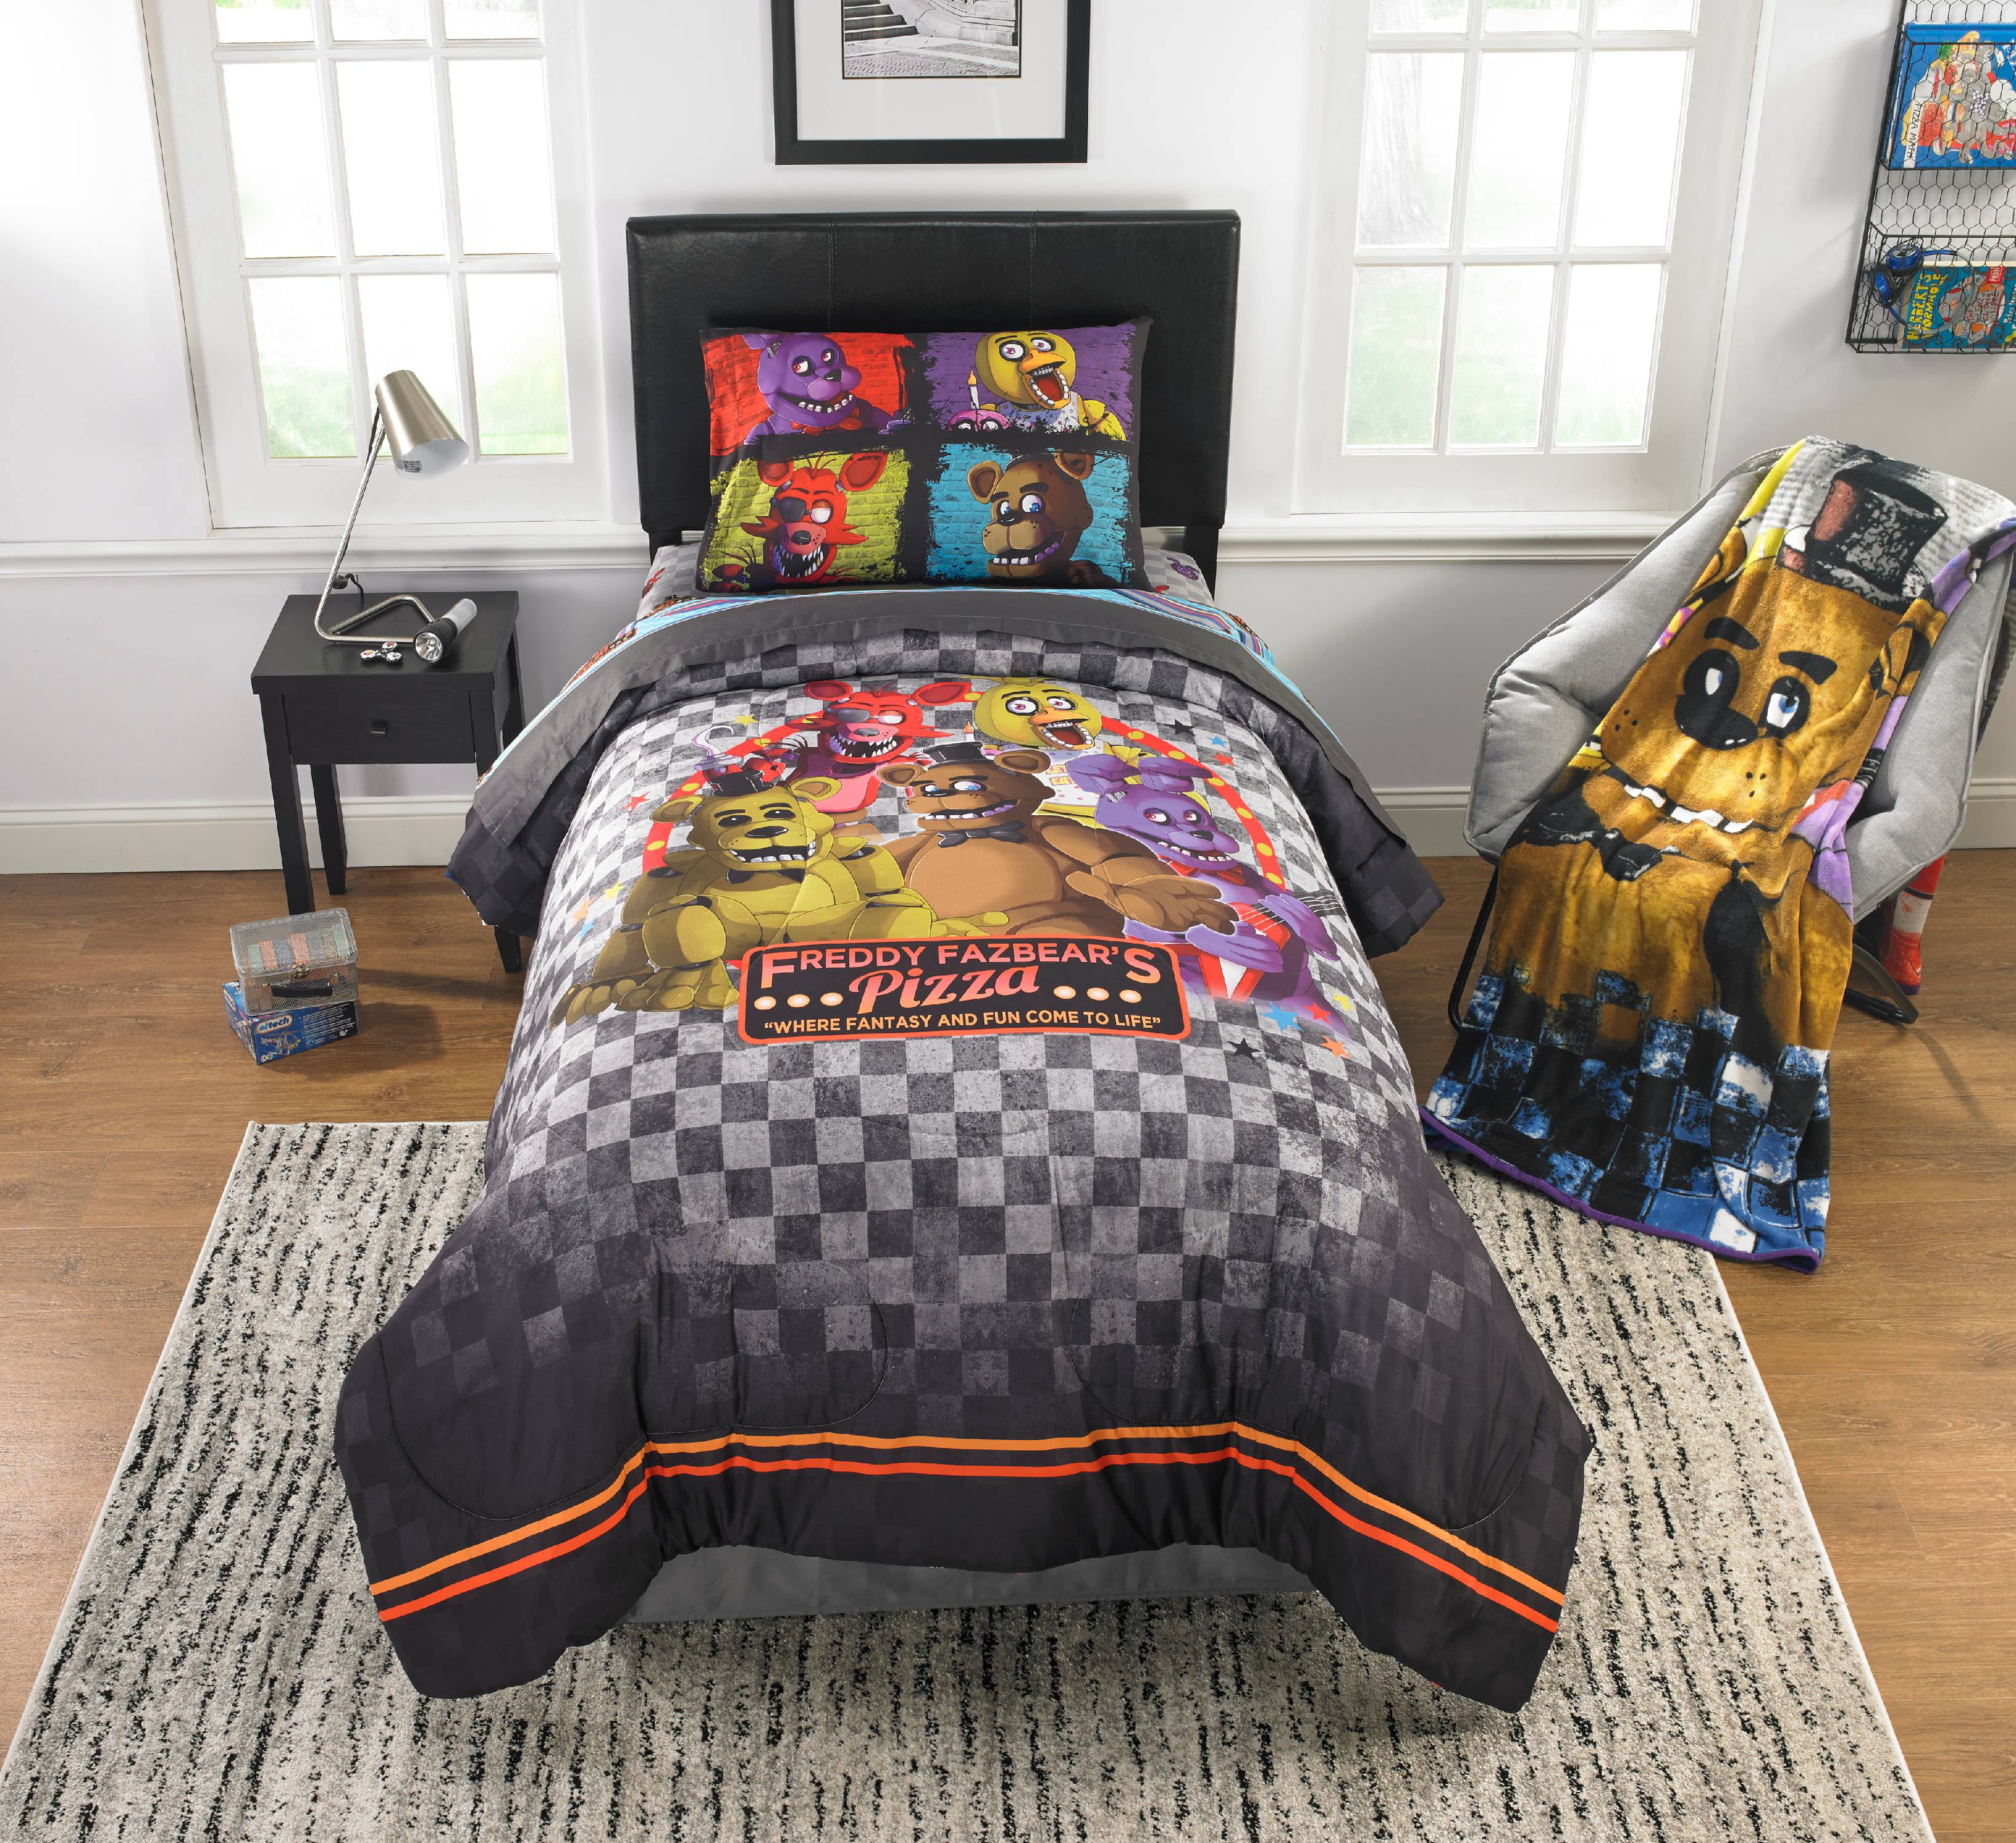 Five Nights at Freddy's 2 piece throw blanket and plush pillow set